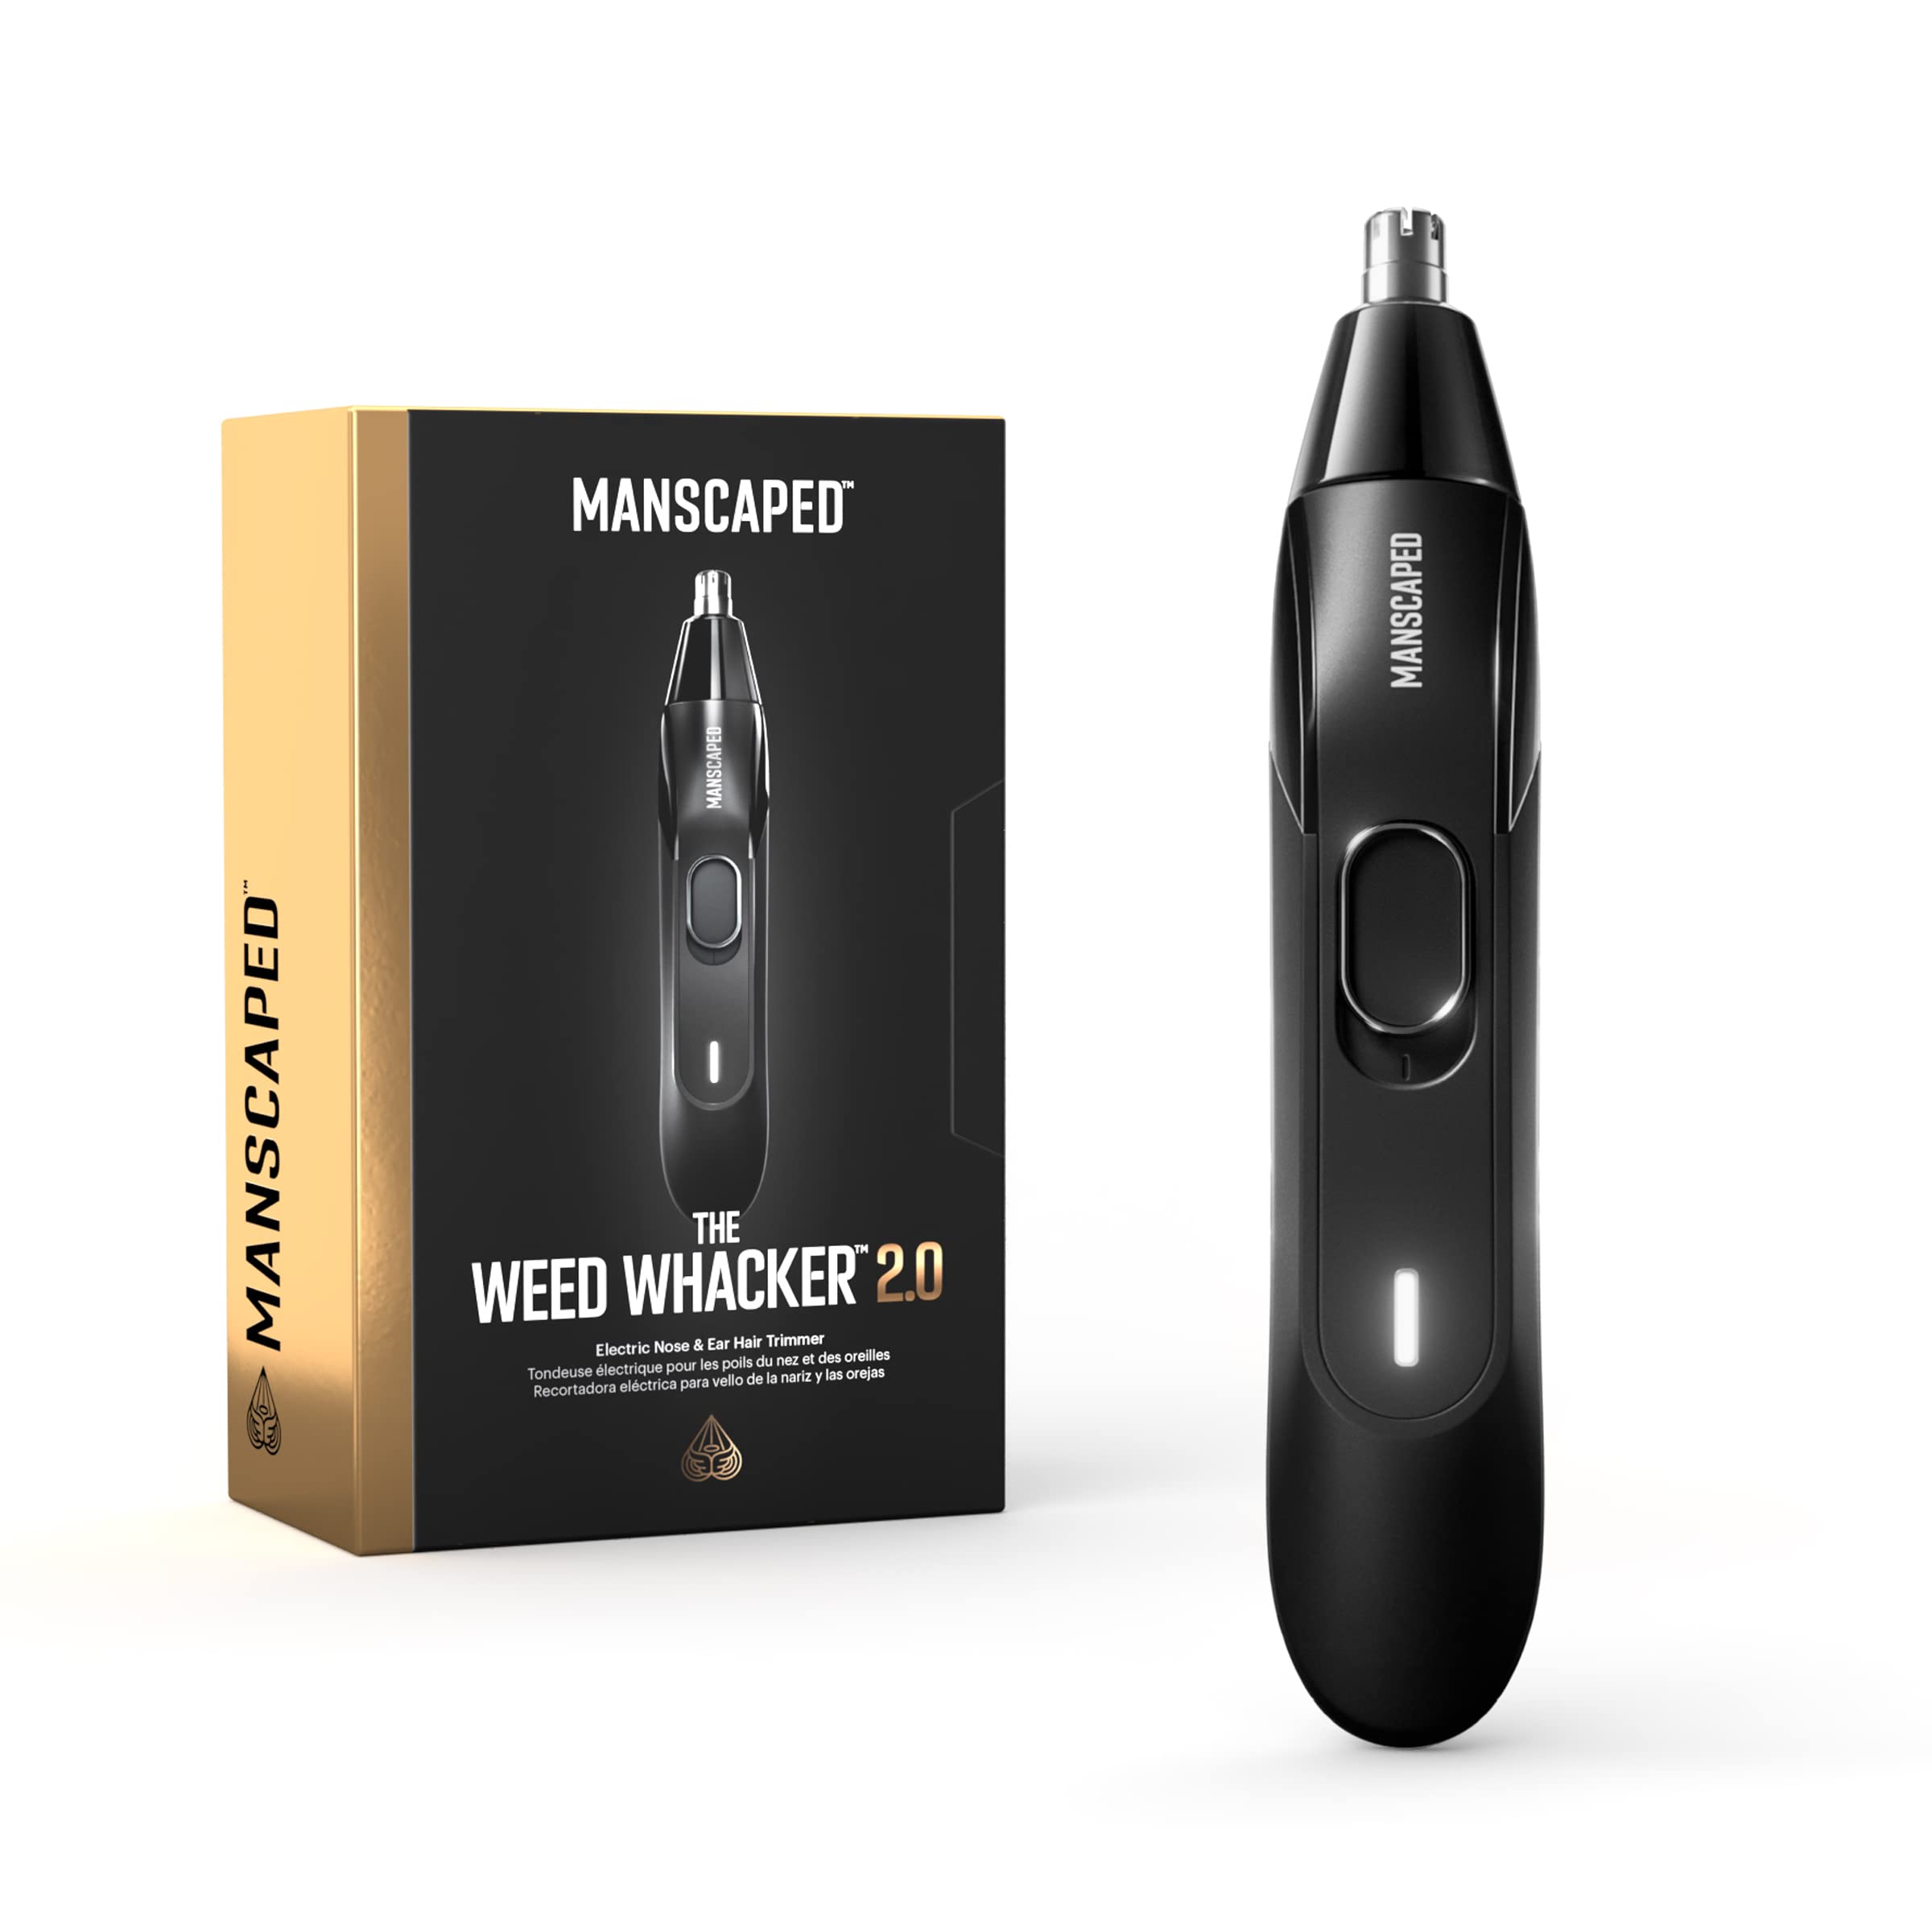 MANSCAPED® Weed Whacker® 2.0 Electric Nose & Ear Hair Trimmer – 7,000 RPM Precision Tool with Rechargeable Battery, Wet/Dry, Easy to Clean, Improved Stainless Steel Replaceable Blade